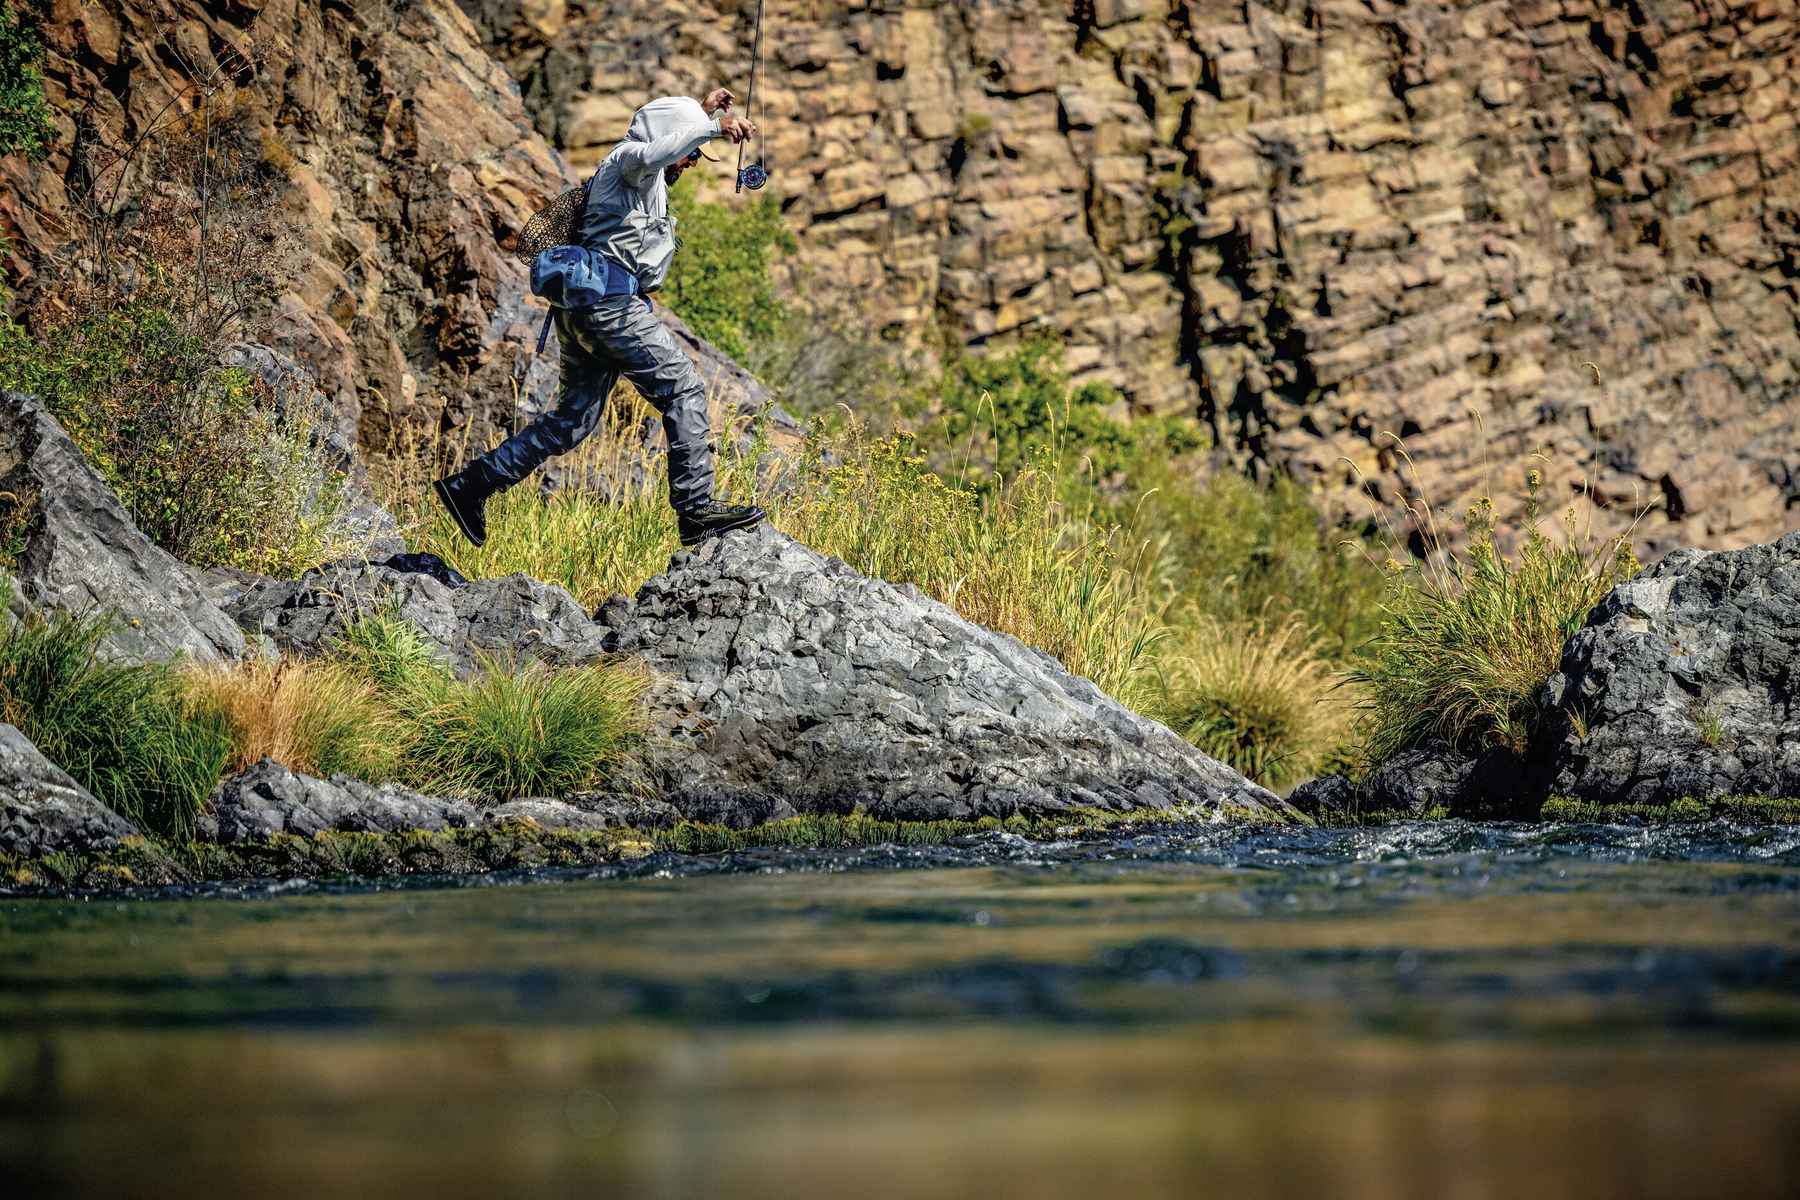 Fly Fishing Gear for Alaska: What Should You Bring?